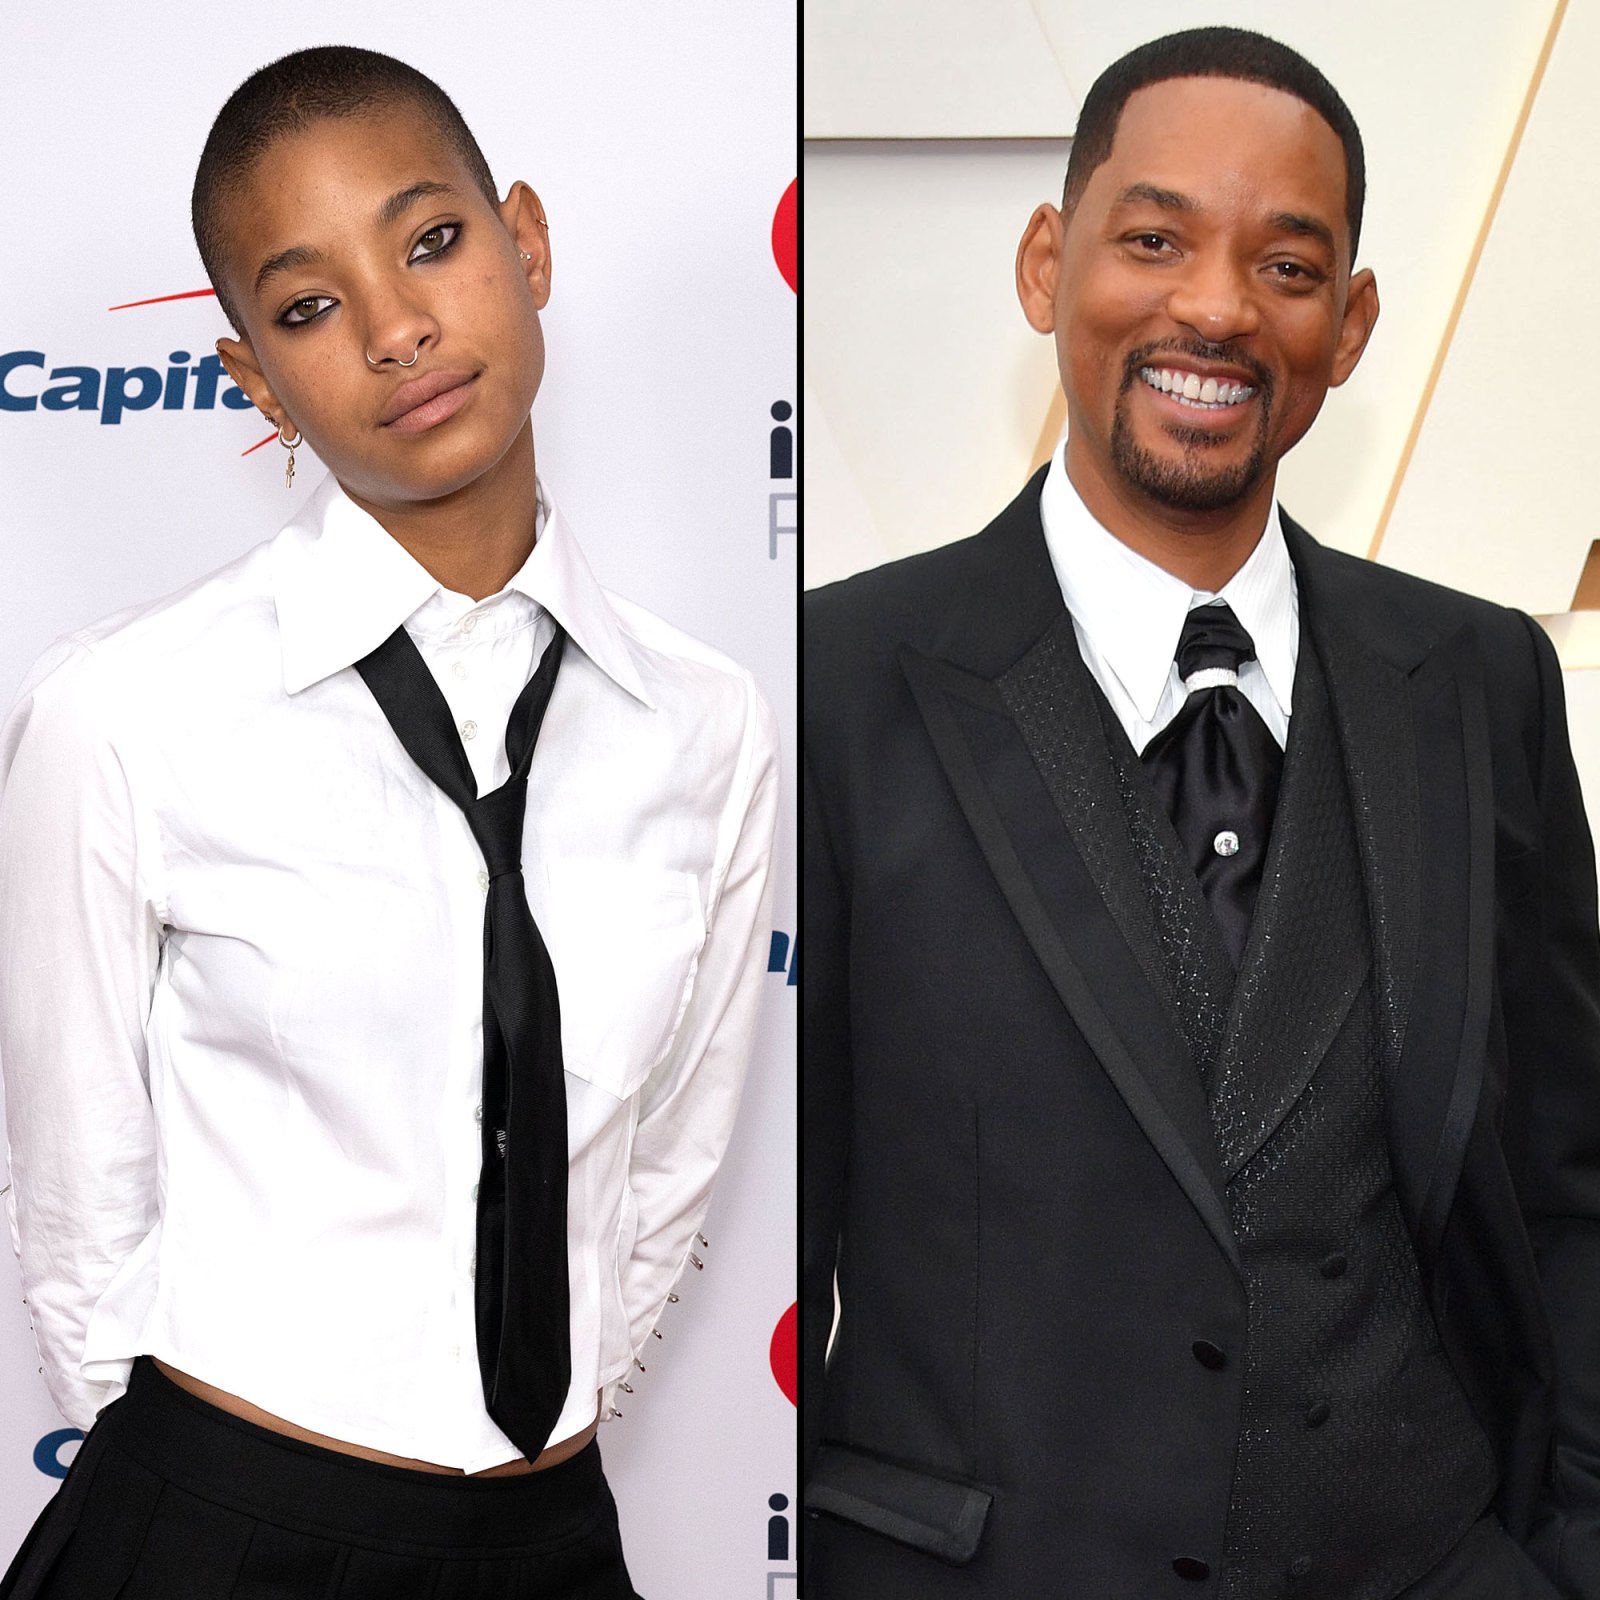 Willow Smith Contemplates Meaning of Life After Dad Will Smith Oscars Slap